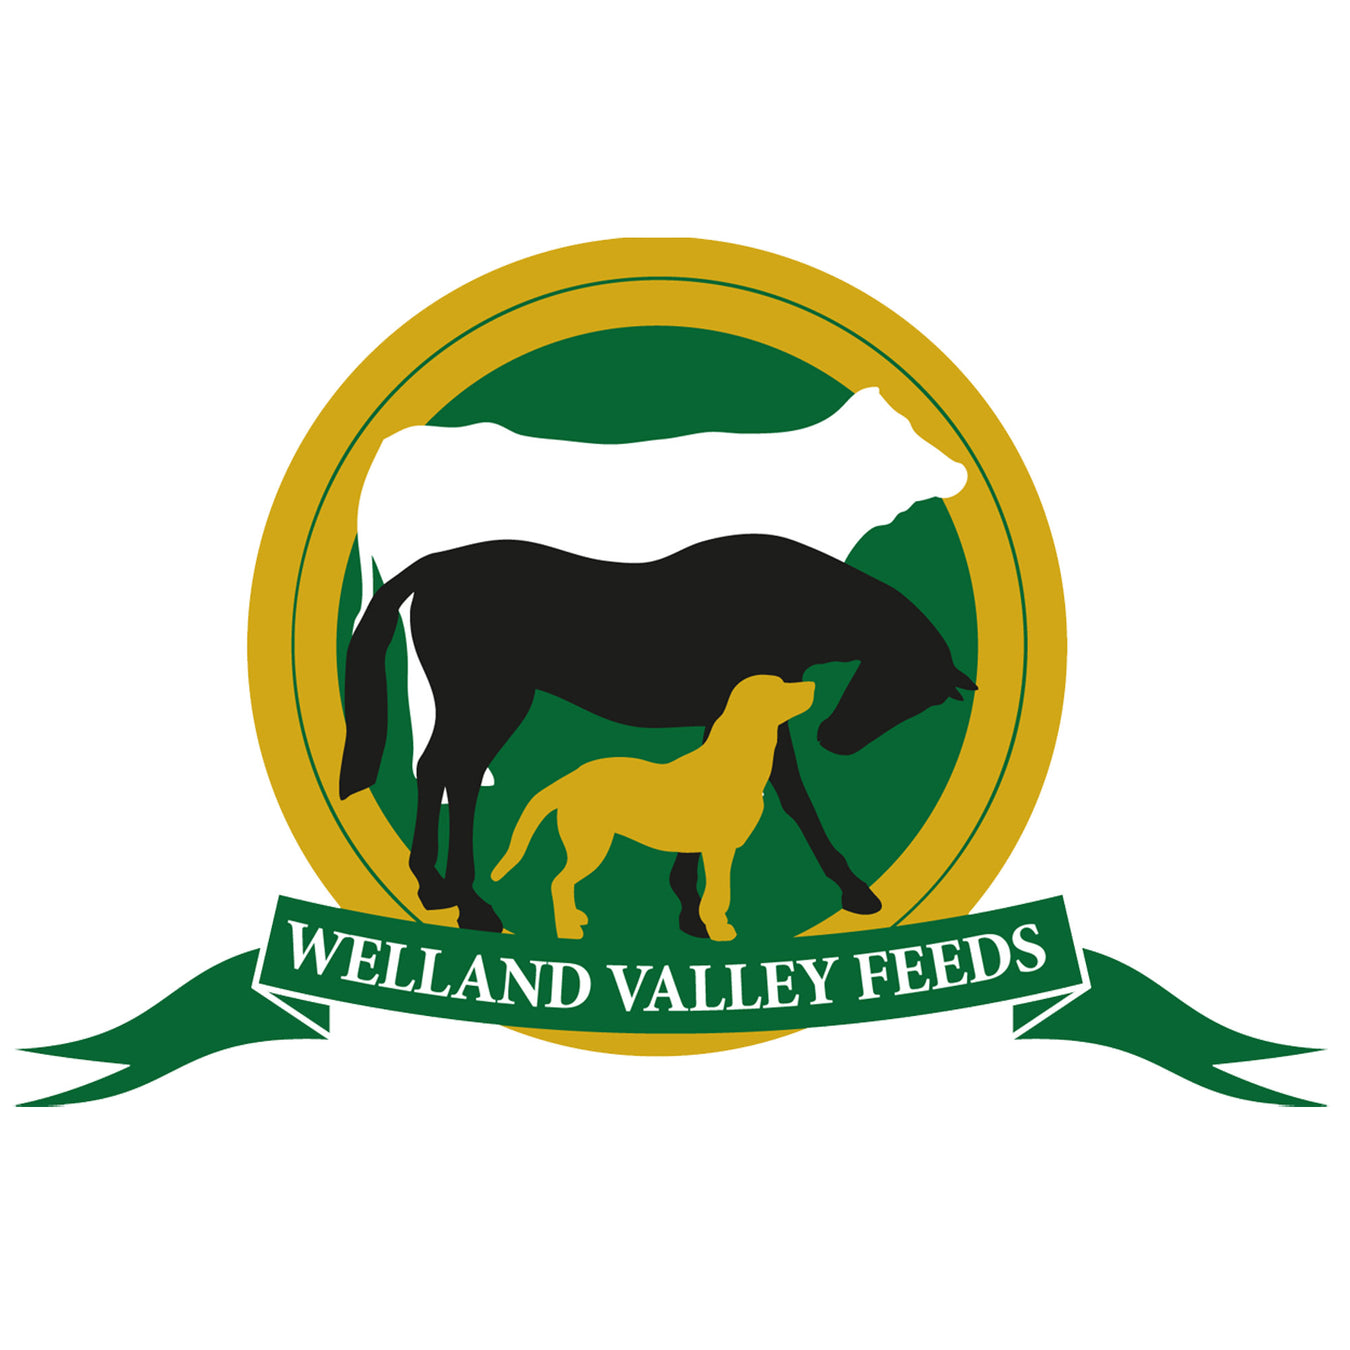 Welland Valley Feeds Products